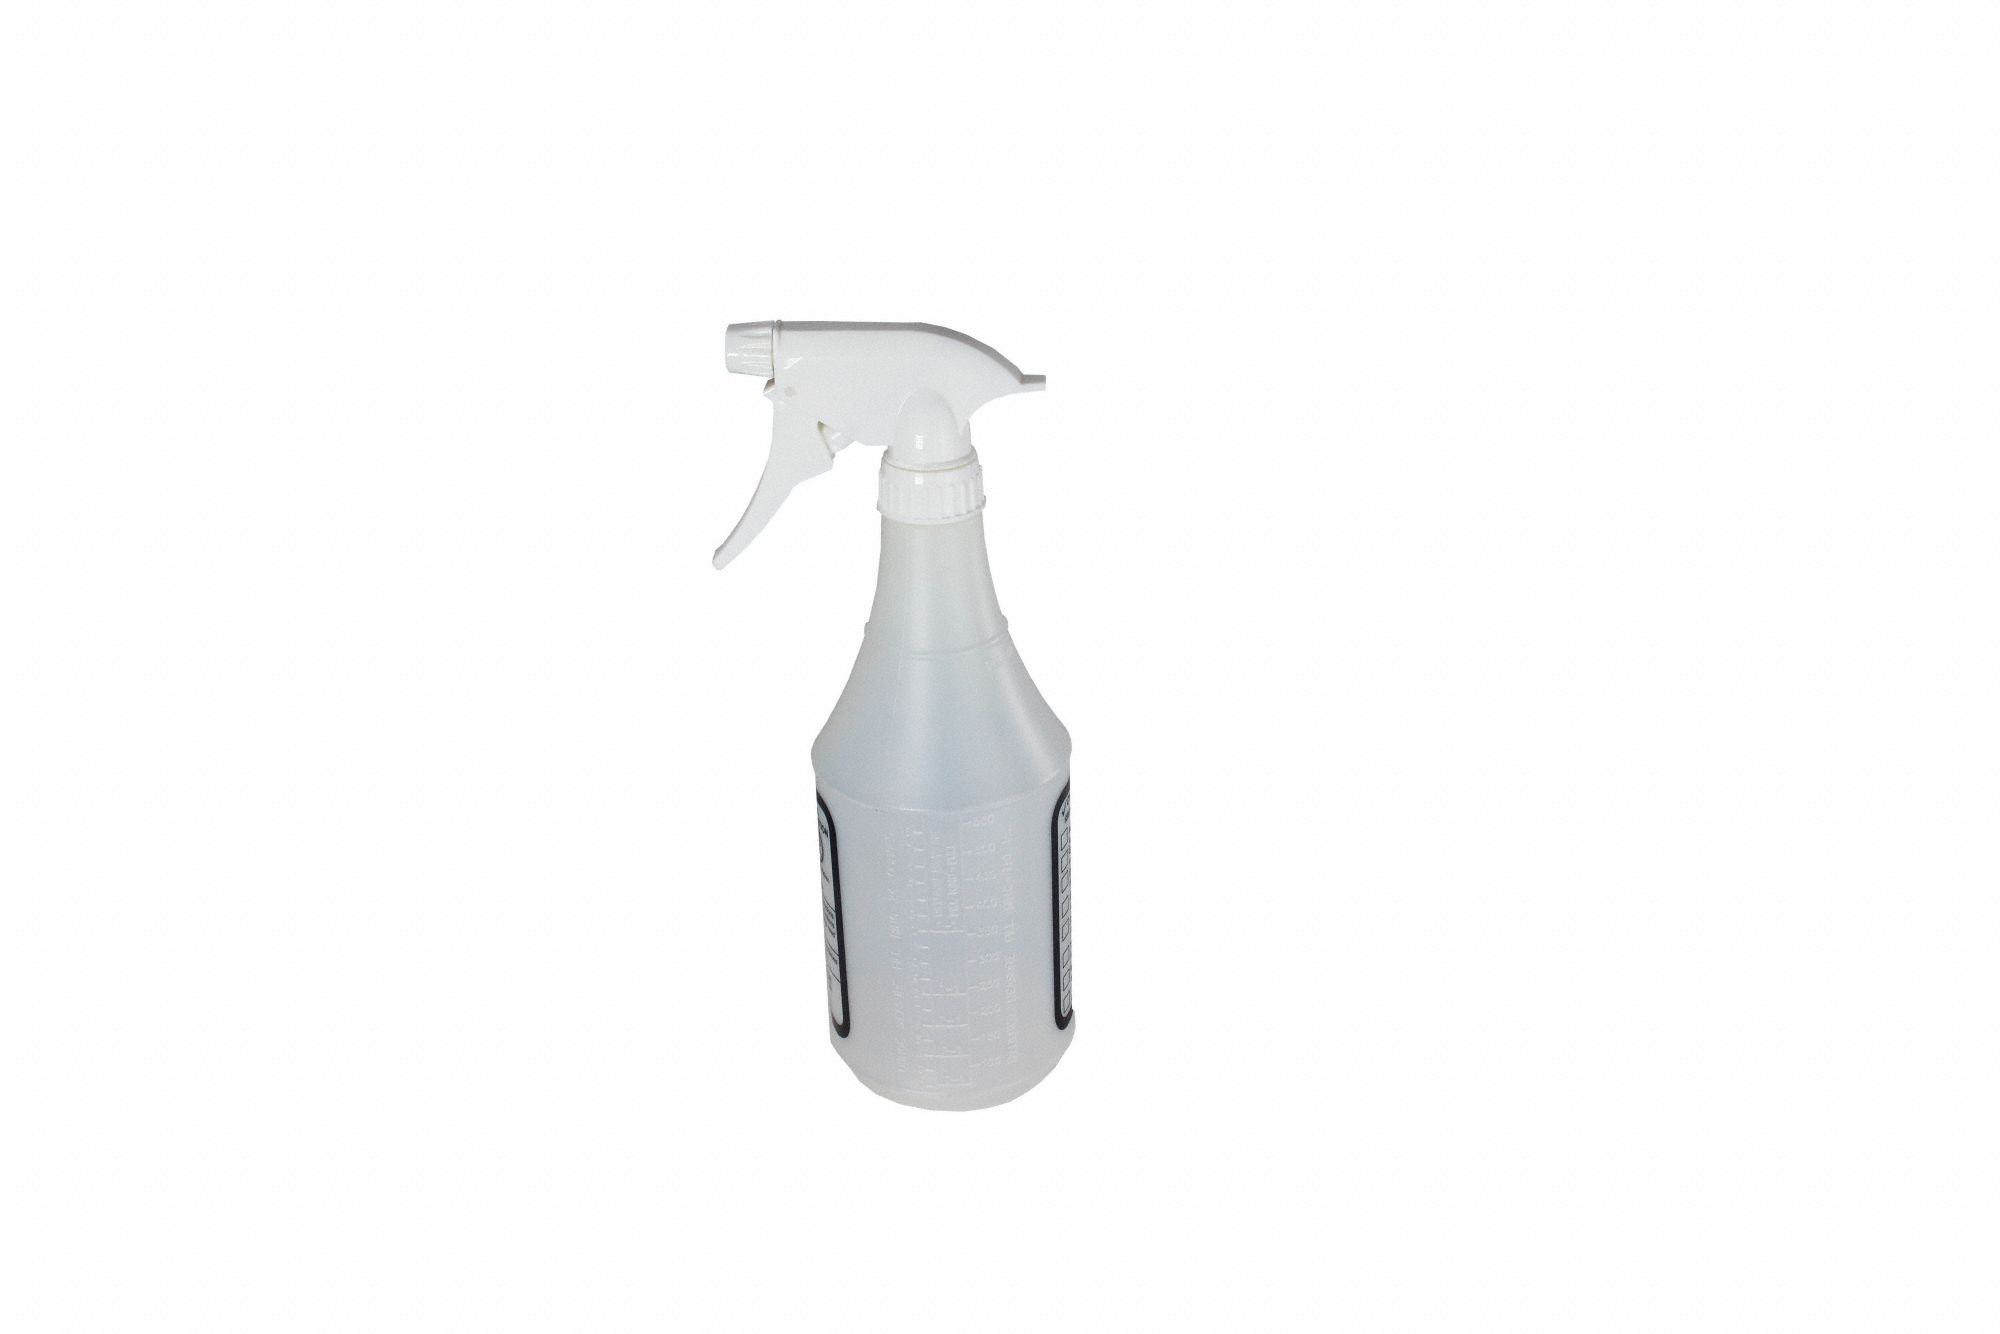 TOUGH GUY Compressed Air Spray Bottle: 51 oz Container Capacity,  Mist/Stream, White, Gray/Black